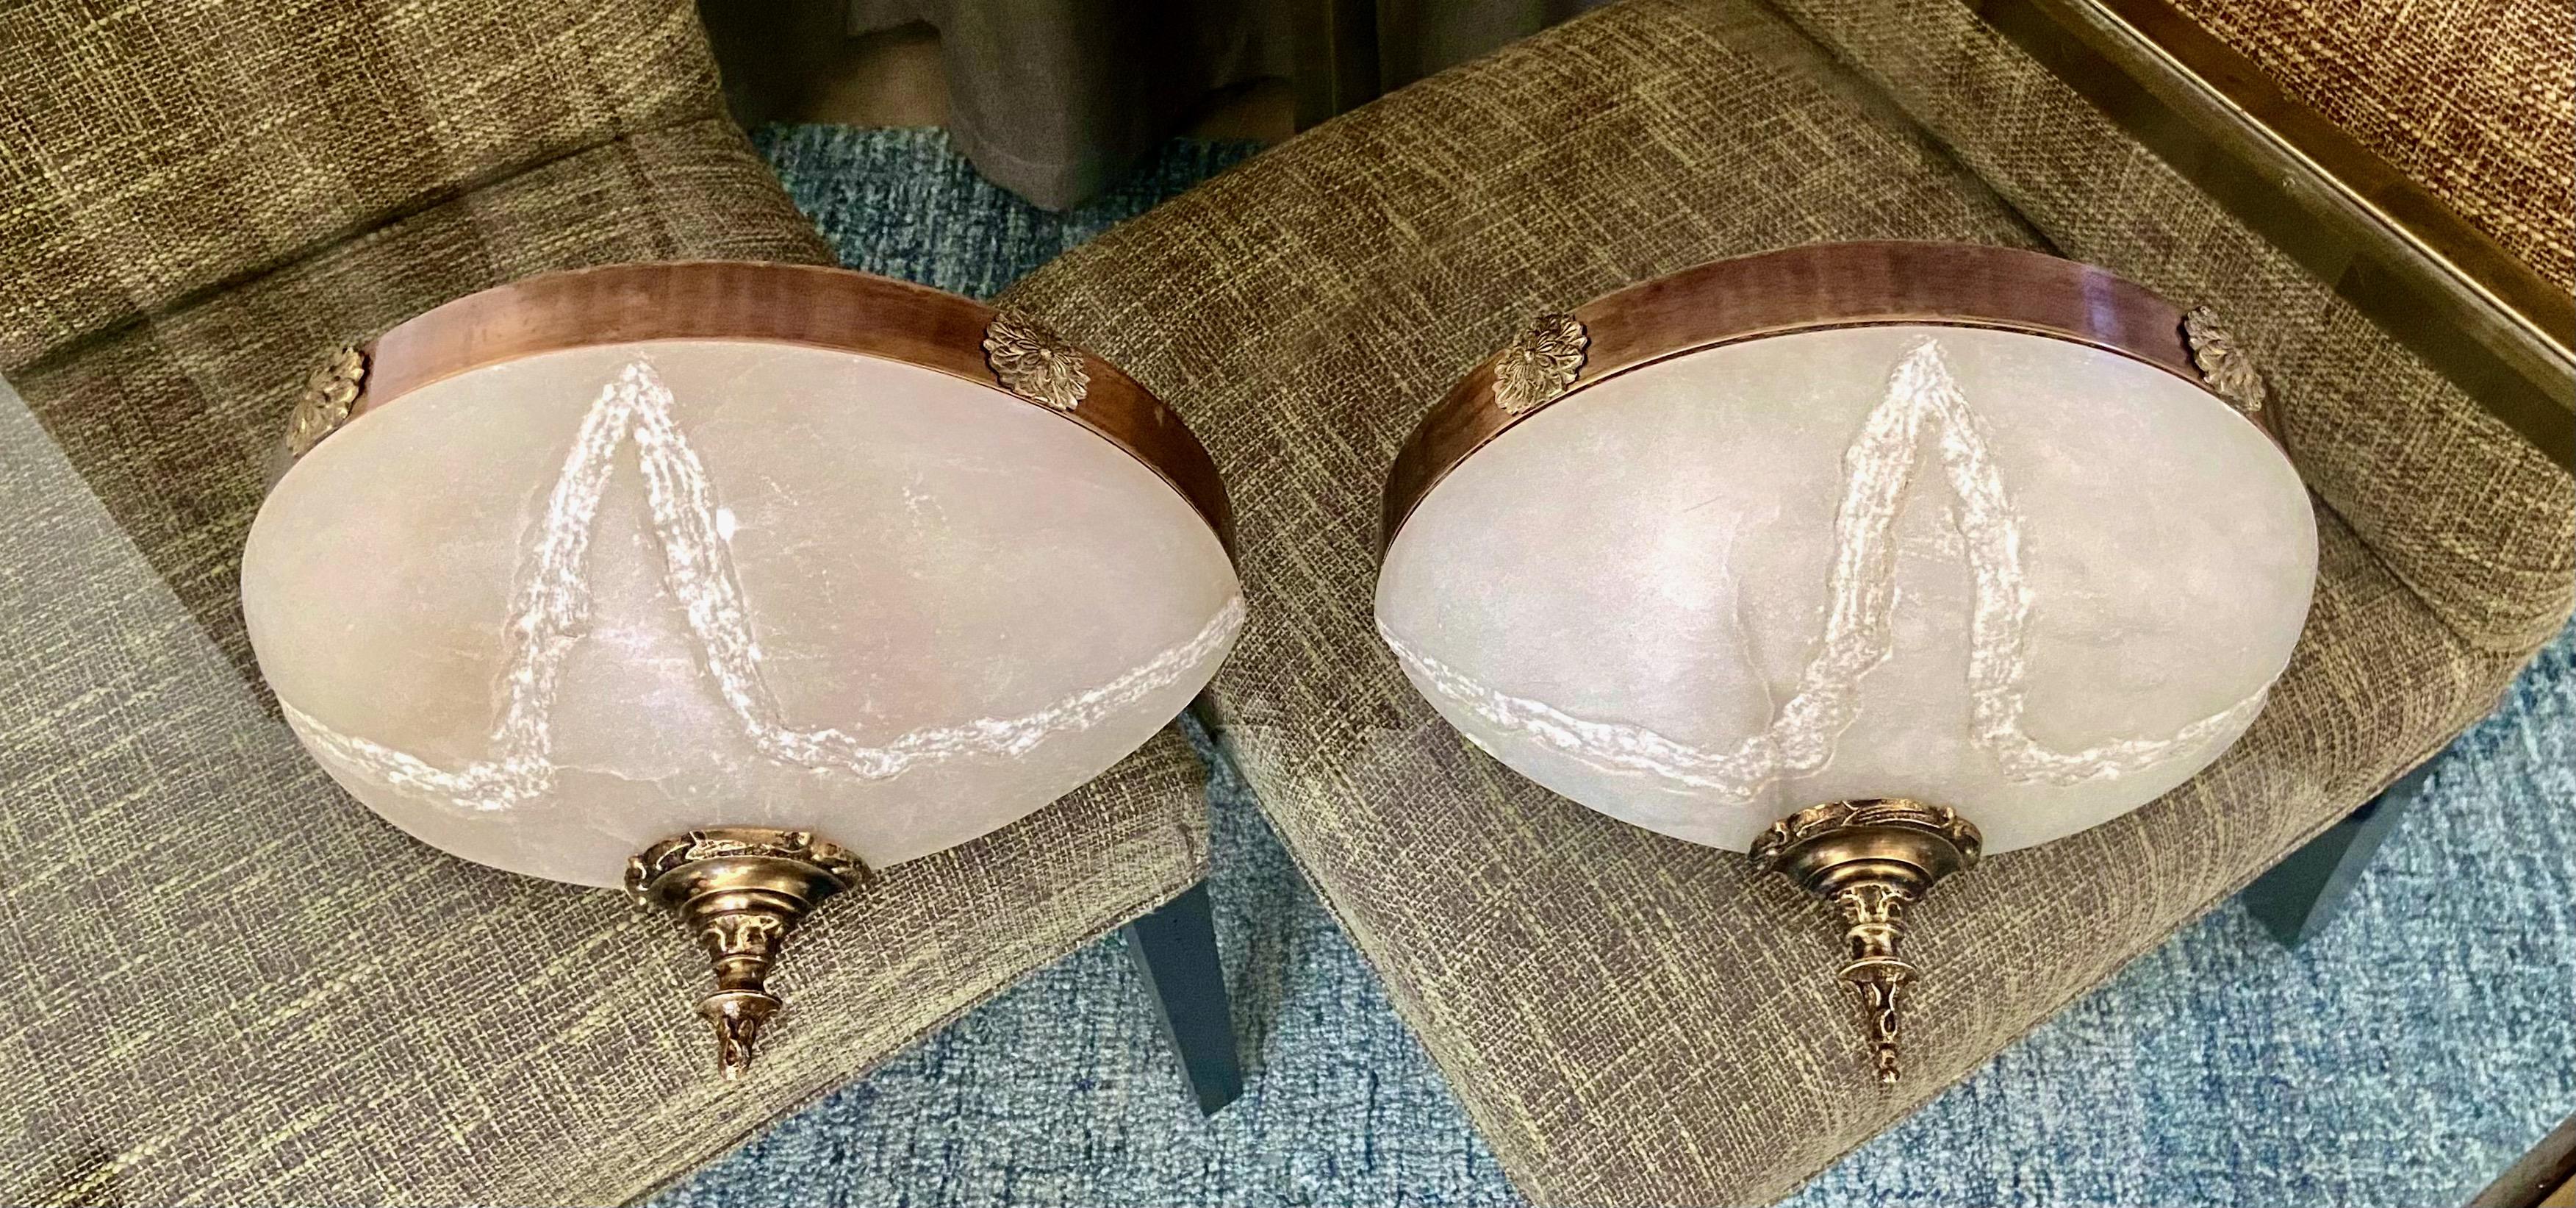 Pair of French Louis XVI style alabaster half moon or quarter shape wall sconces. The alabaster has an etched stylized design pattern providing unique effect when lit. The sconces are enhanced with decorative brass antiqued fittings. Each uses